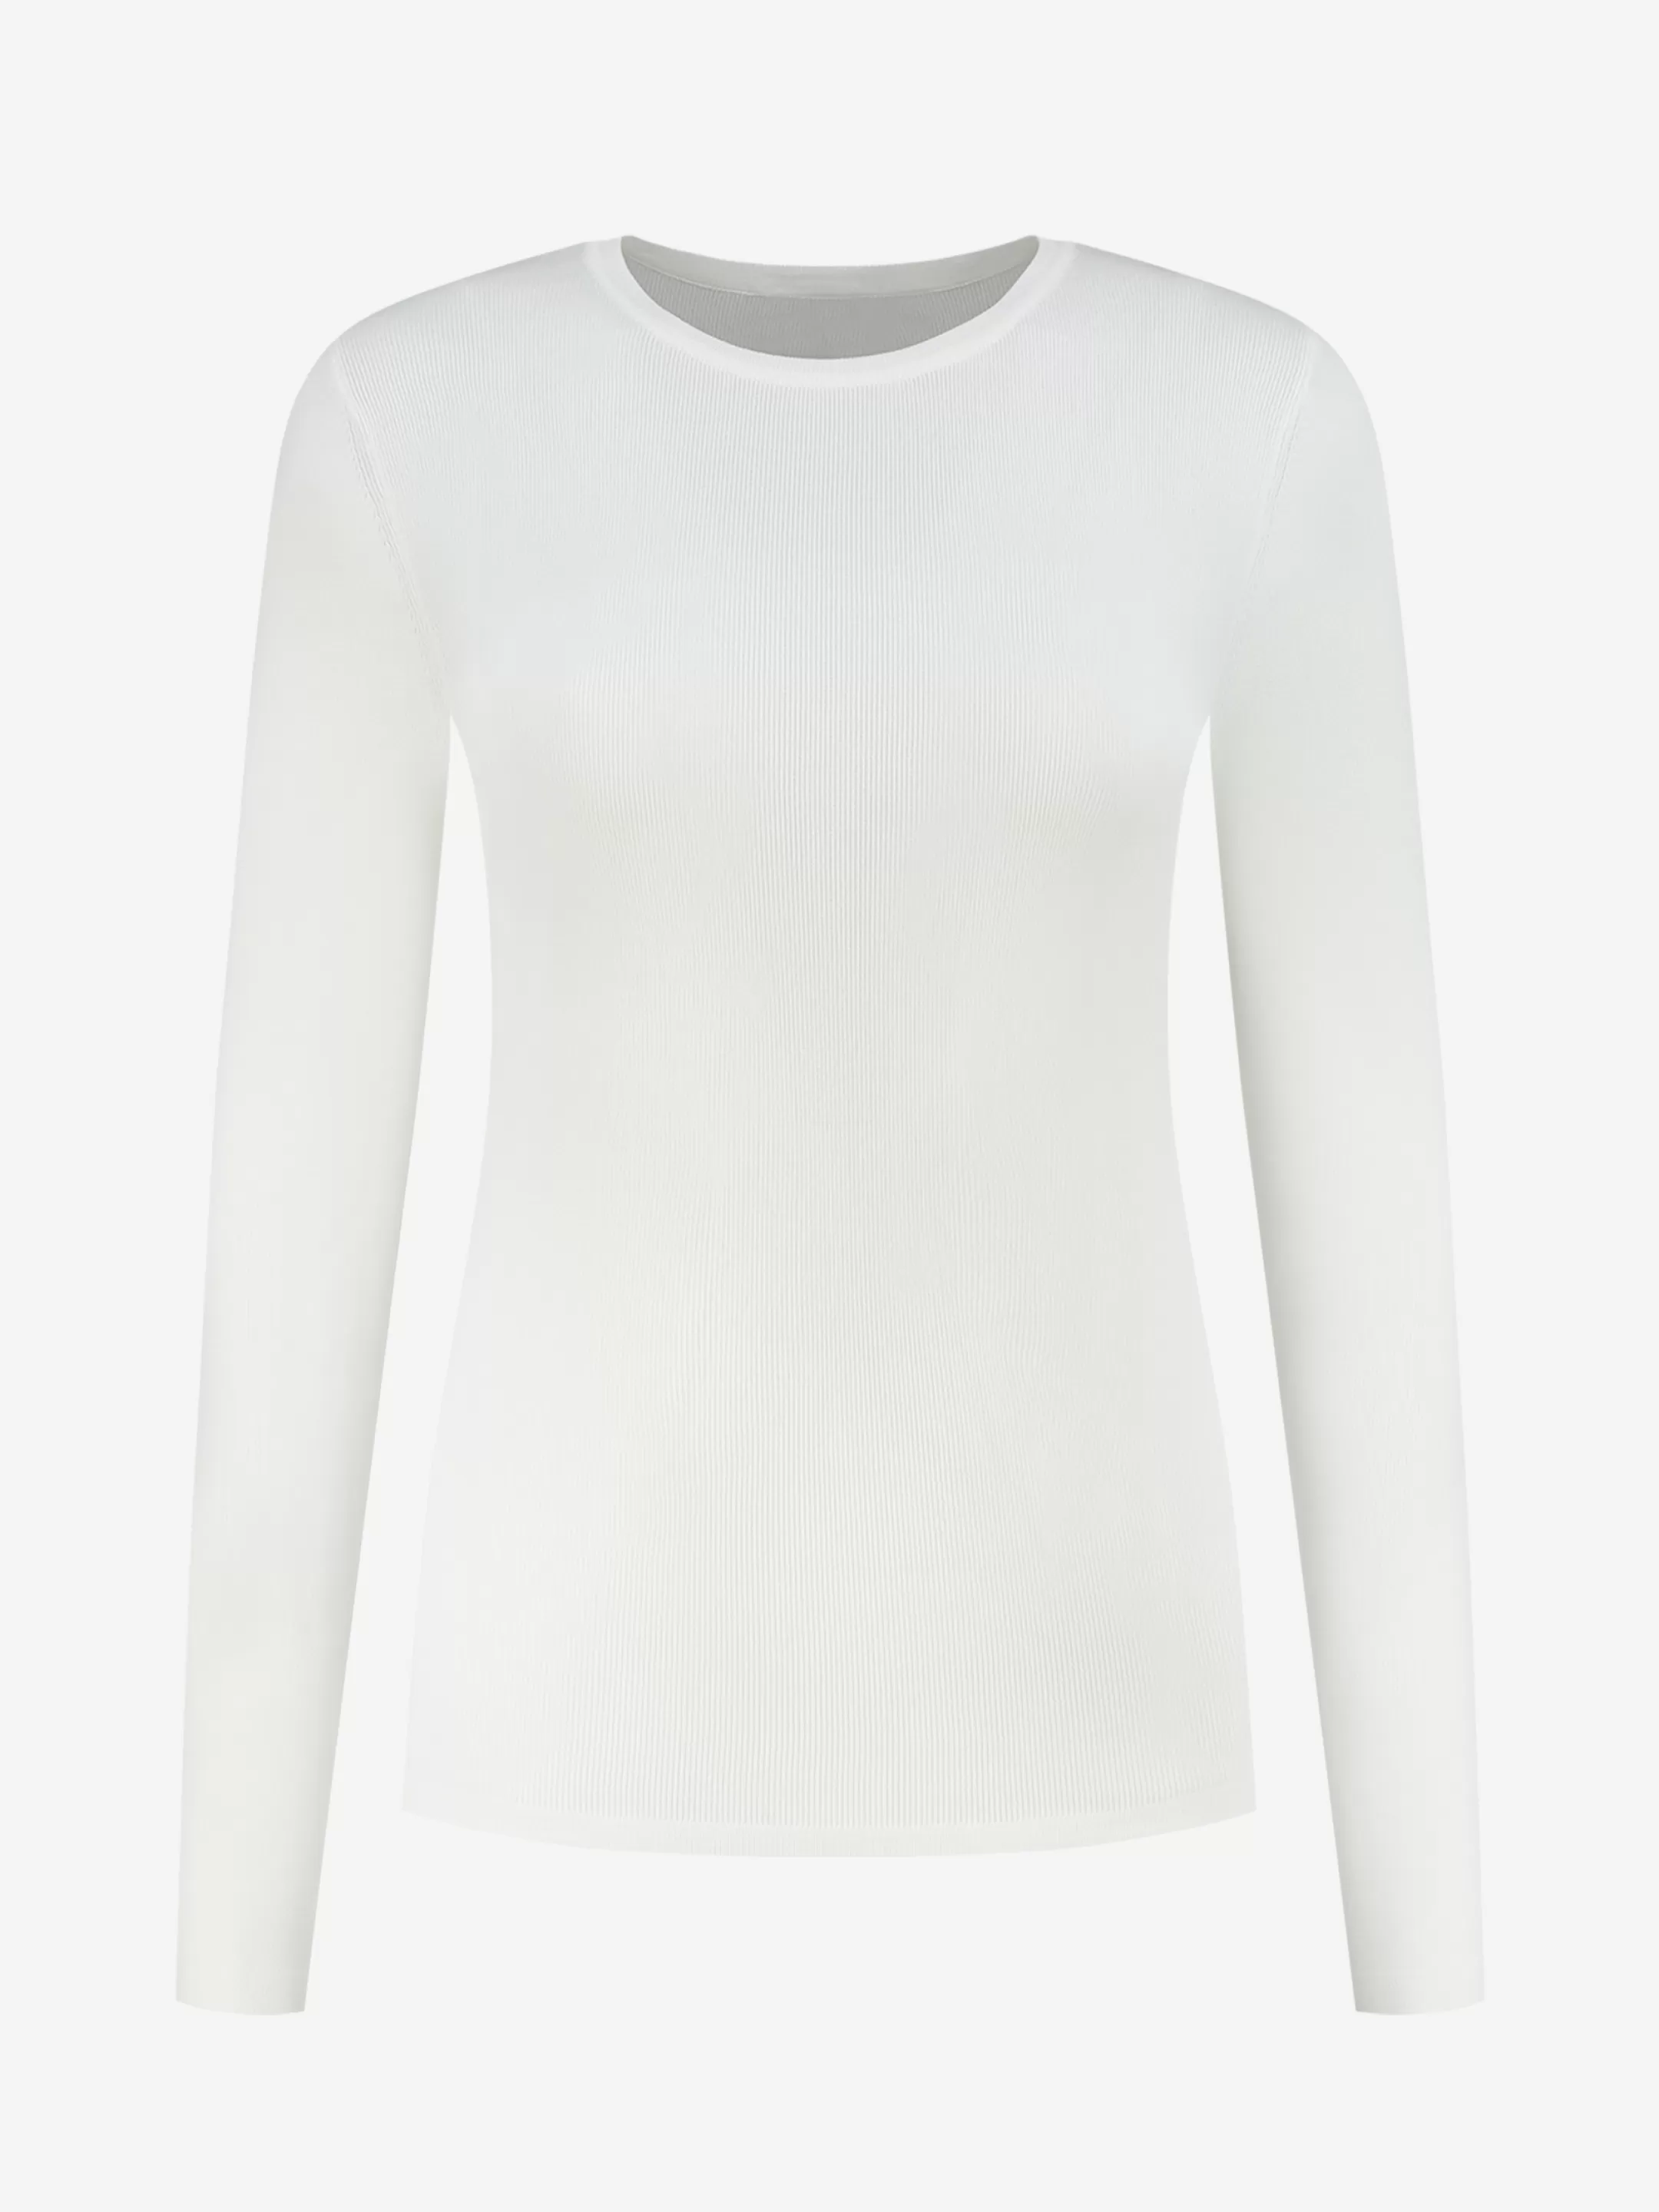 Cheap FITTED TOP MET LANGE MOUWEN    Basics | Tops